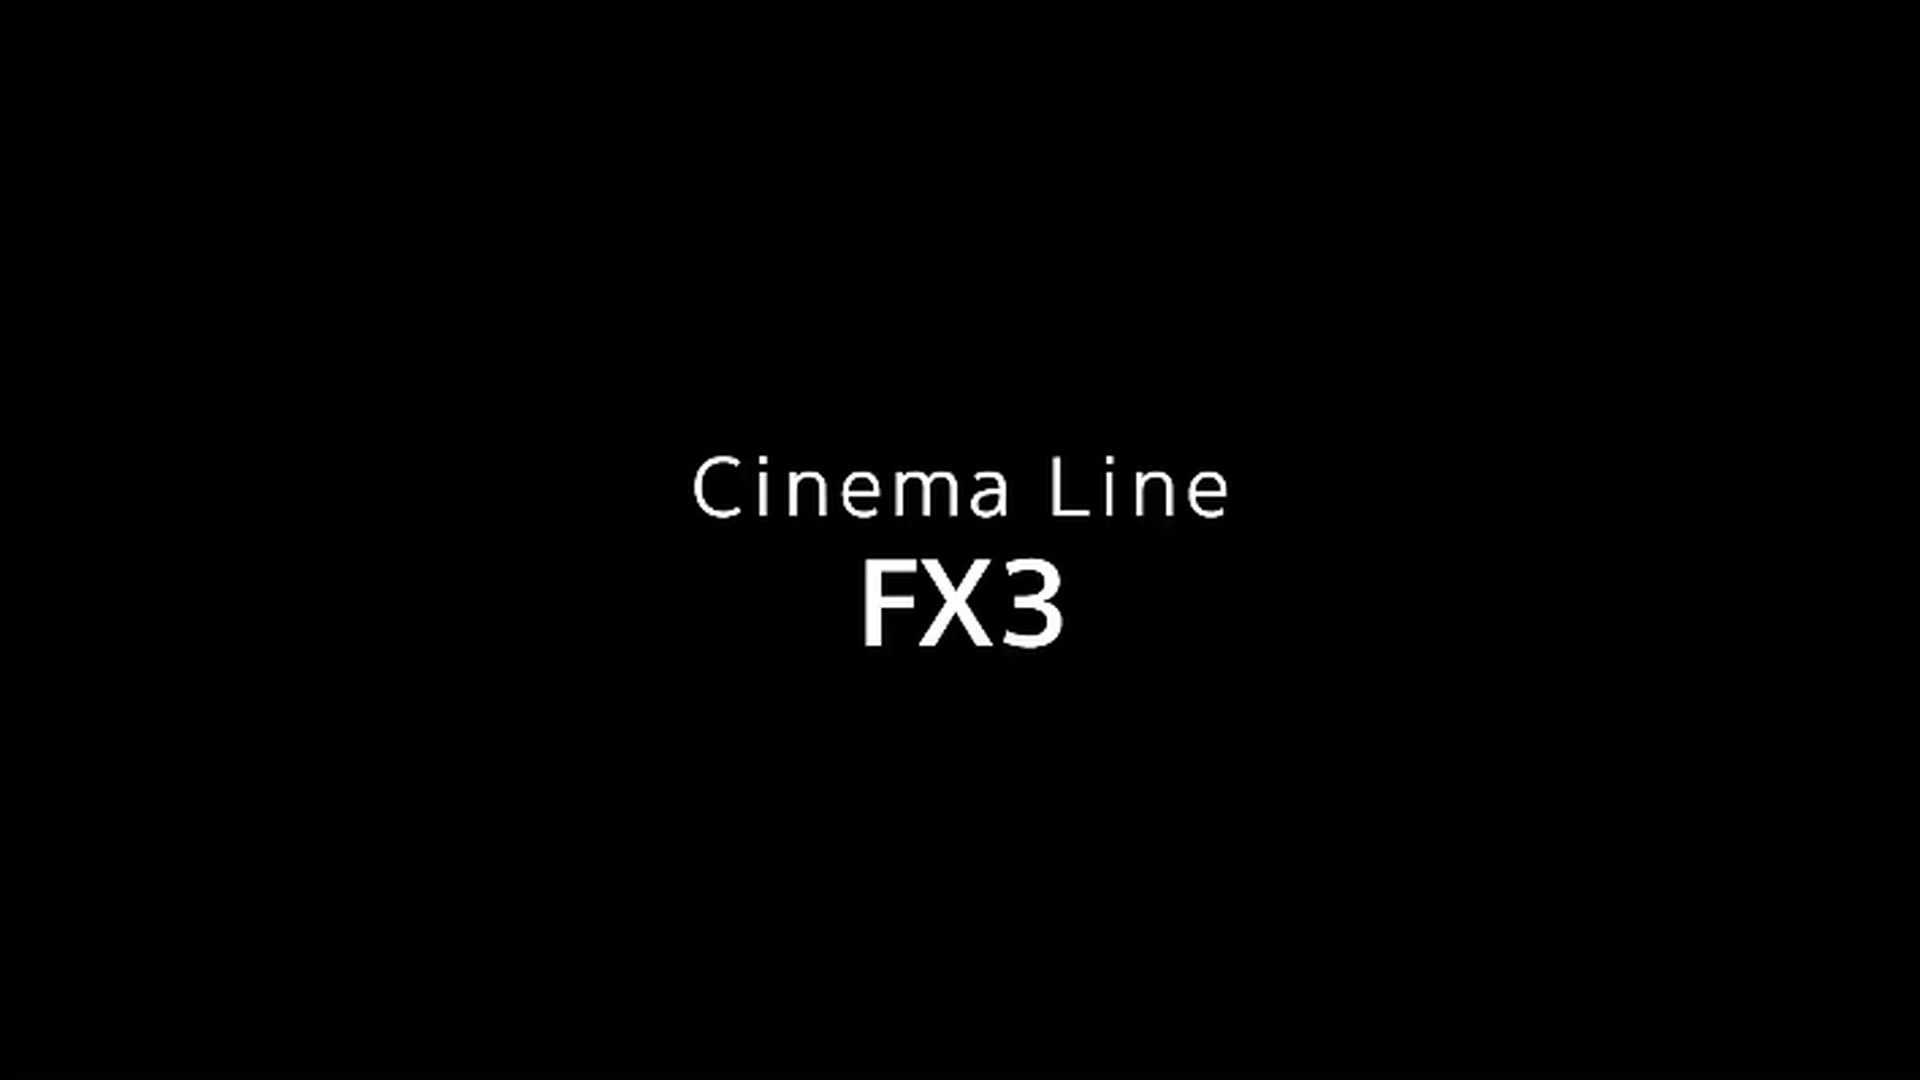 New Cinema Line camera announcement on February 23, 2021 _ Sony_20210224_000405.353.png